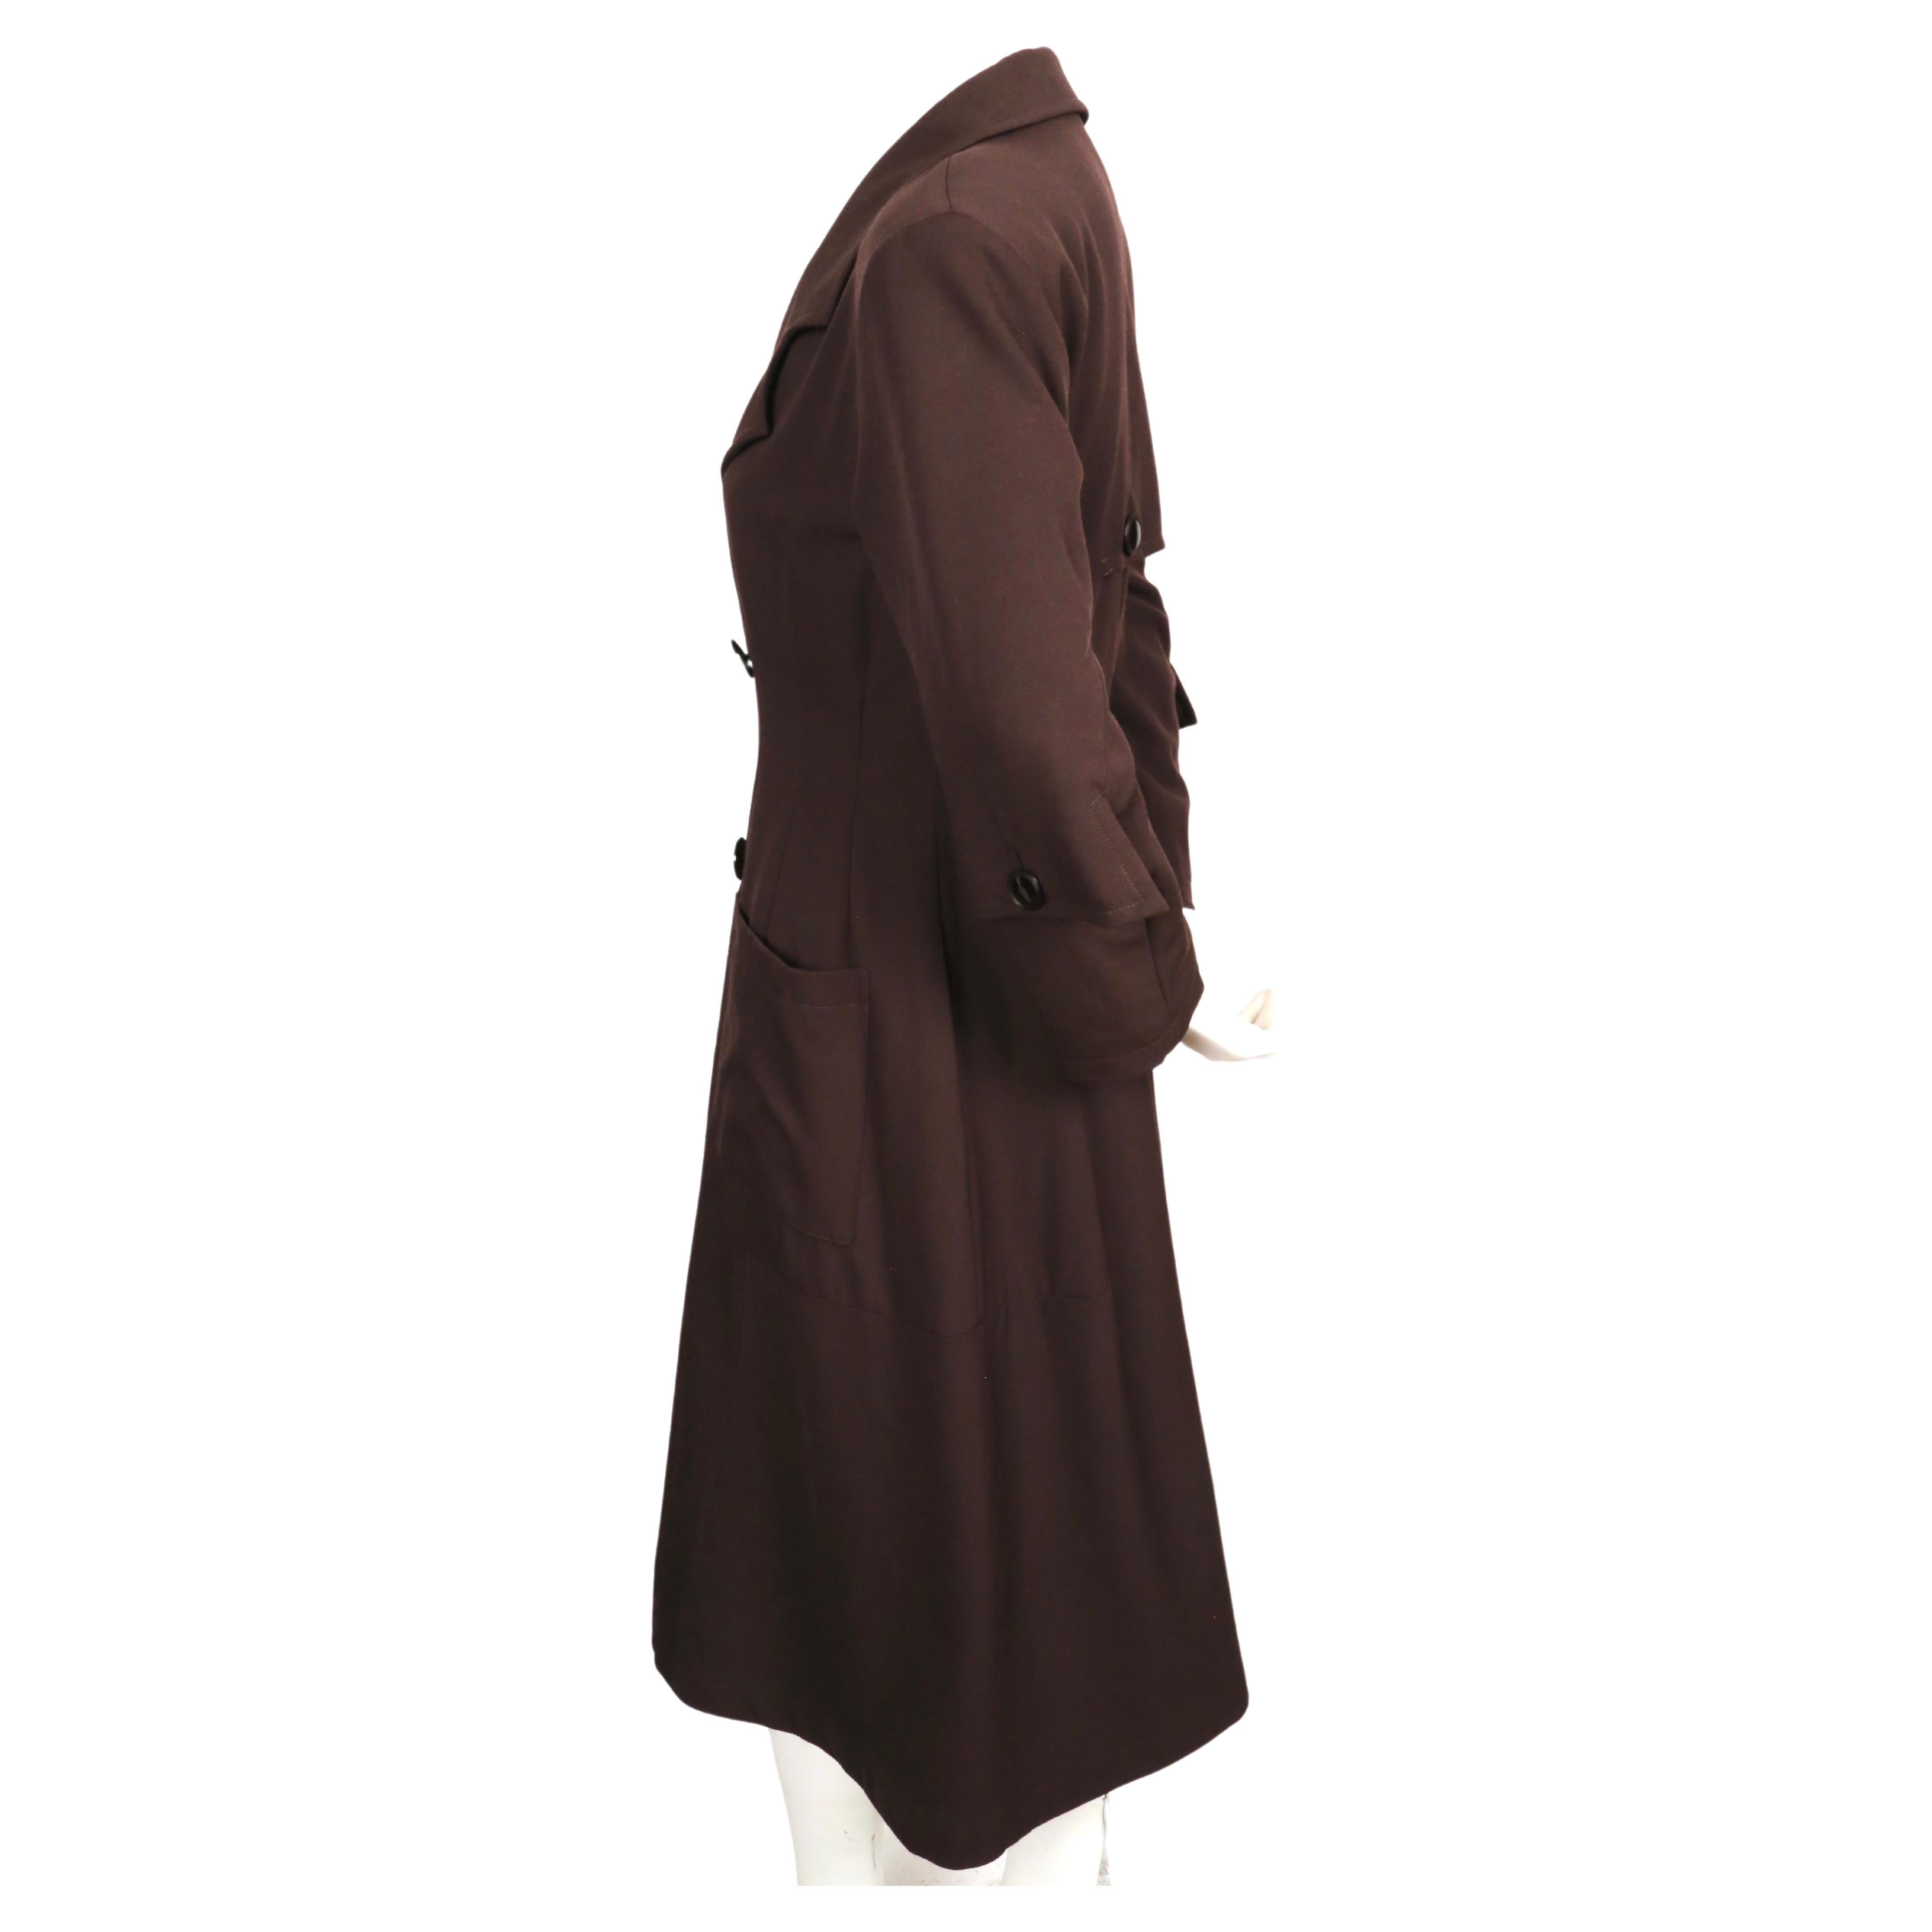 1989 YOHJI YAMAMOTO brown runway coat with button detail In Good Condition For Sale In San Fransisco, CA